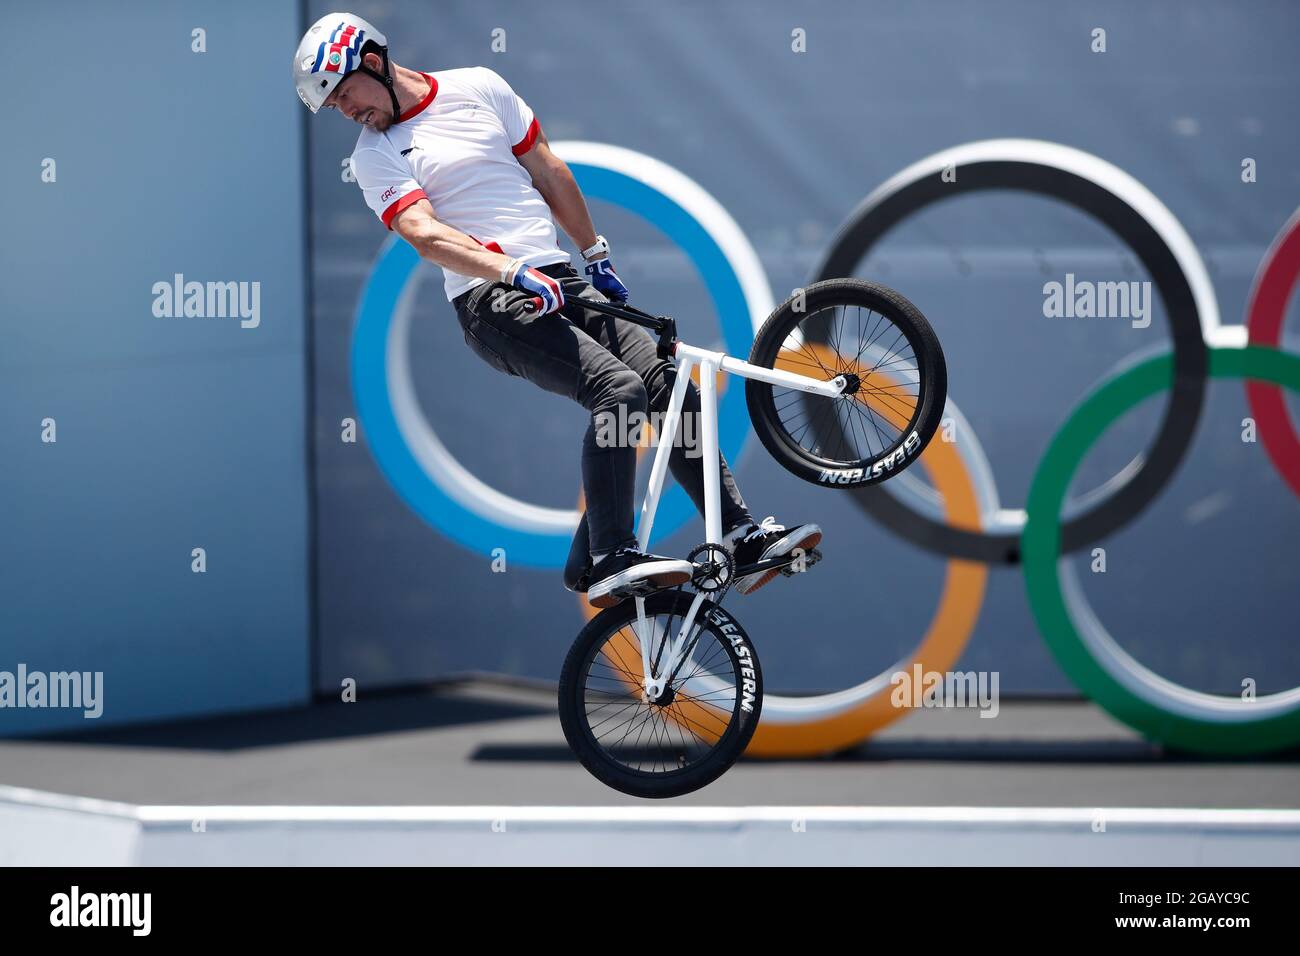 August 1, 2021: KENNETH TENCIO ESQUIVEL (CRC) competes in the Cycling BMX  Racing Men's Park Final during the Tokyo 2020 Olympic Games at Ariake  Sports Park BMX Freestyle. (Credit Image: © Rodrigo